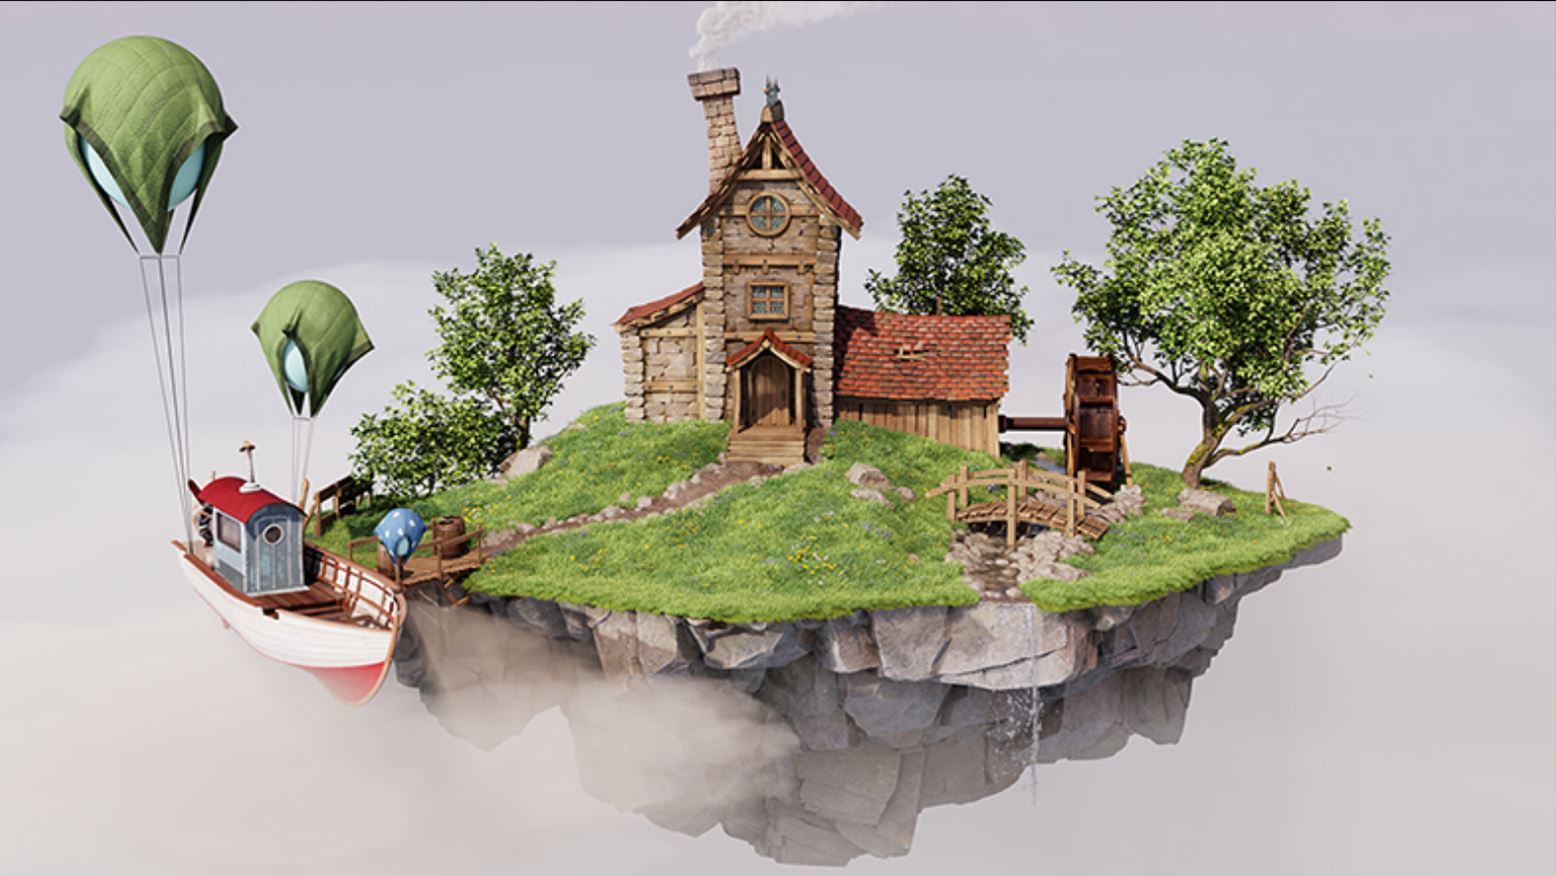 3D Image of Floating Island and Building